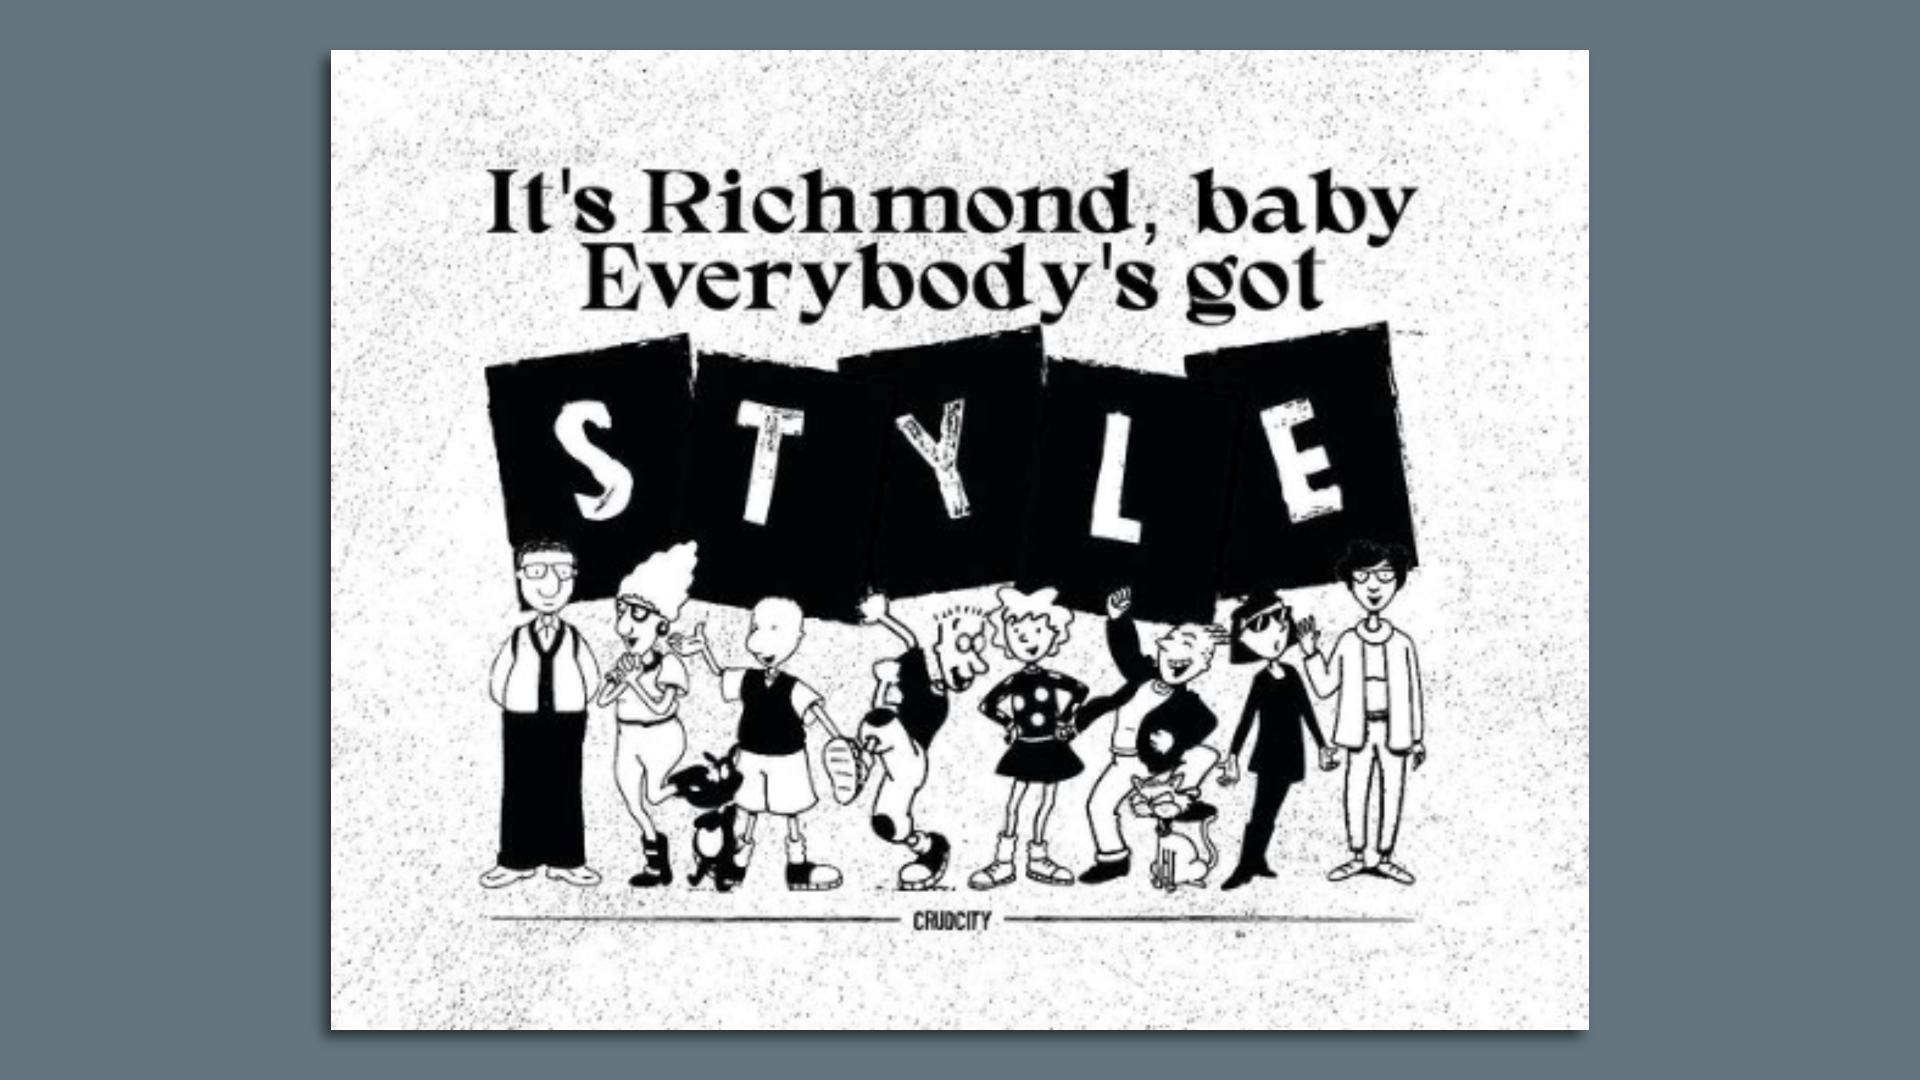 Meme with 10 characters from show doug, above them is a sign that says, "it's Richmond, Baby, Everybody's got Style"